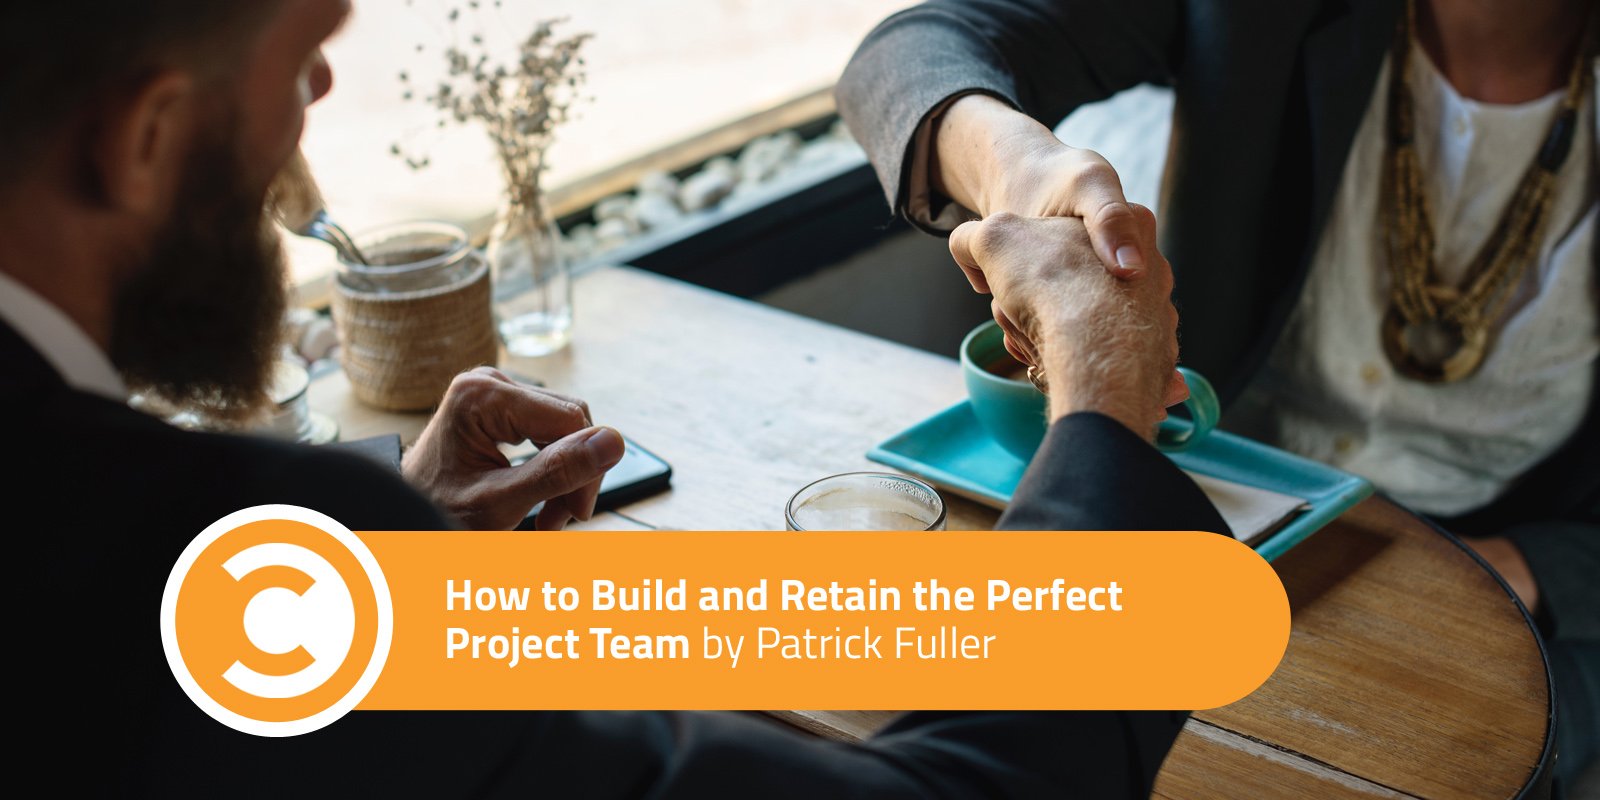 How to Build and Retain the Perfect Project Team